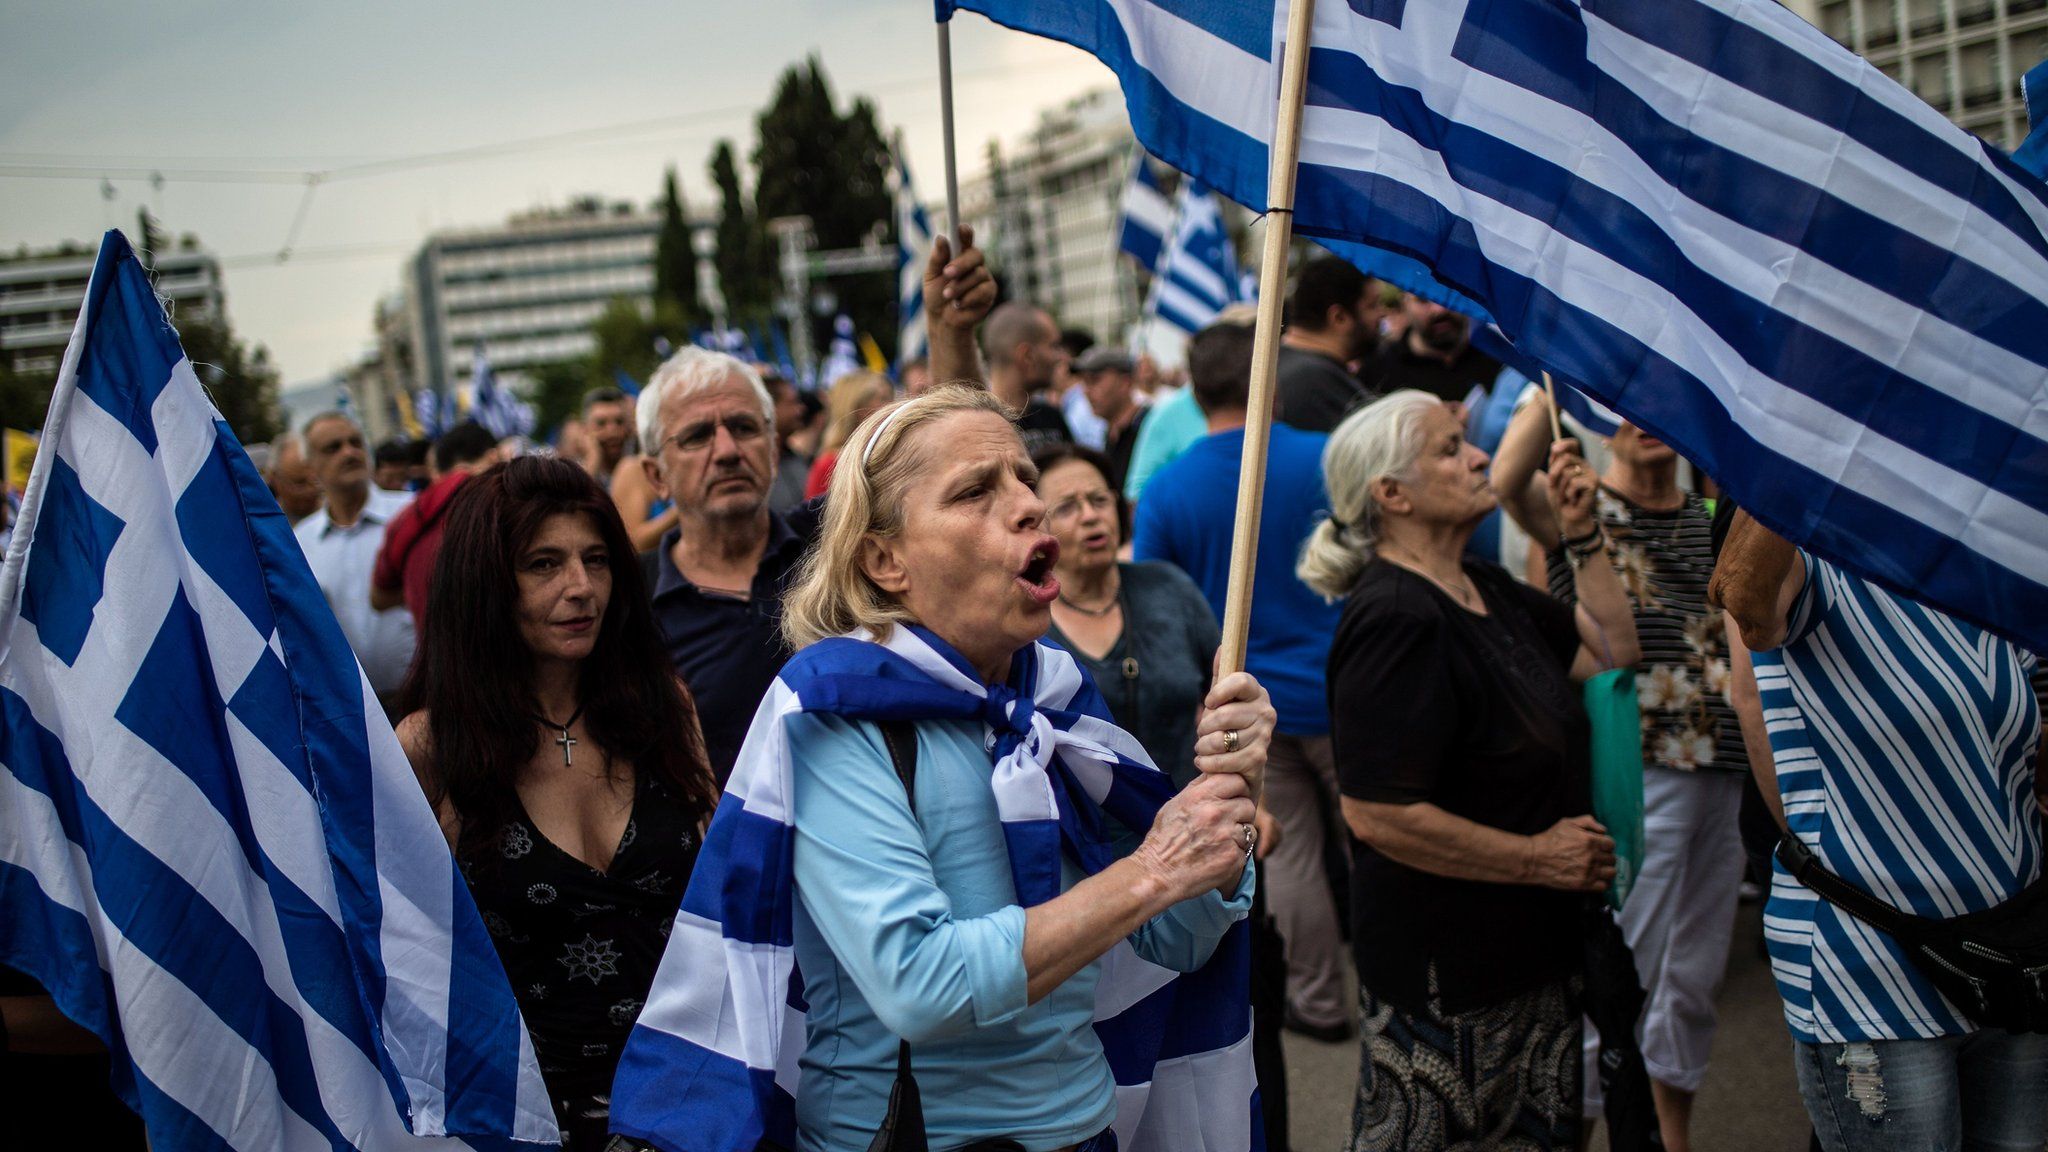 A woman holds a Greek flag during a demonstration in Athens on June 16, 2018 against the agreement reached to resolve a 27-year name row with Macedonia has kicked up a political storm in Greece.